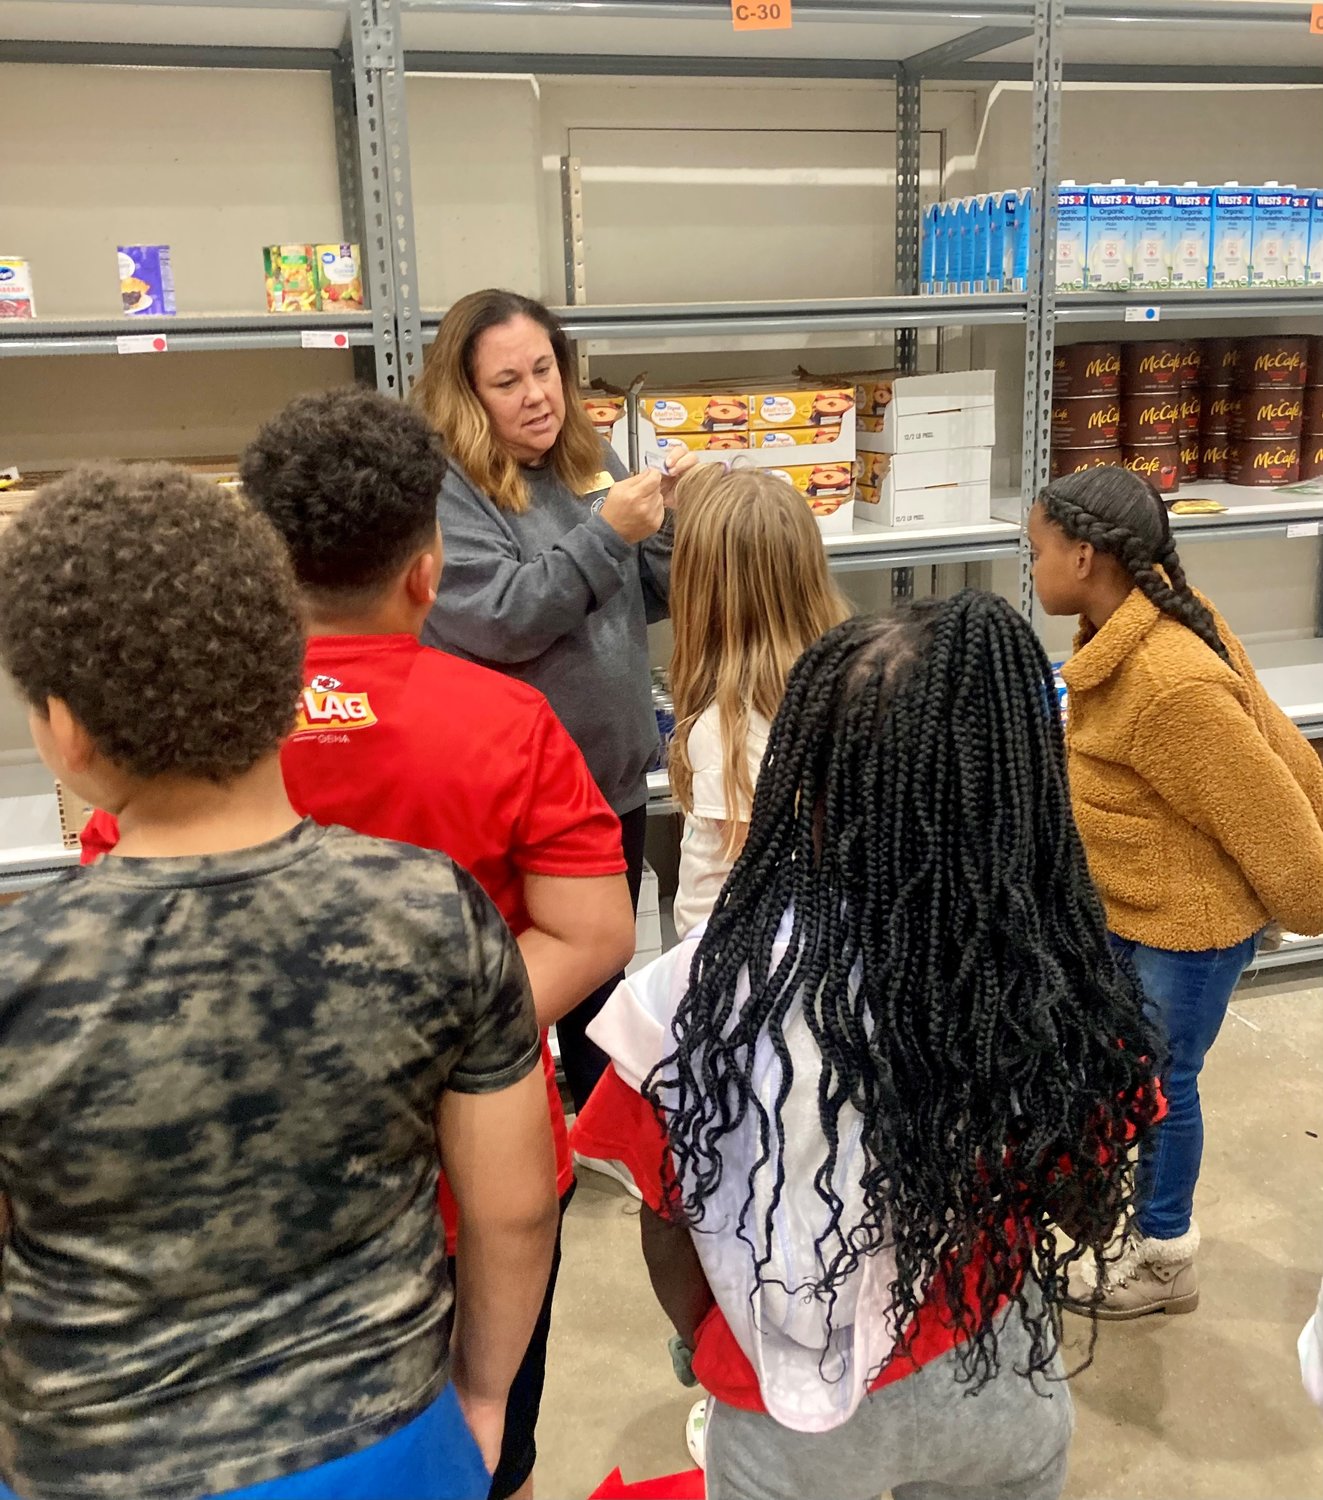 Members of the Boys & Girls Torch Club help out in the food pantry during a visit to the Catholic Charities Center in Jefferson City.